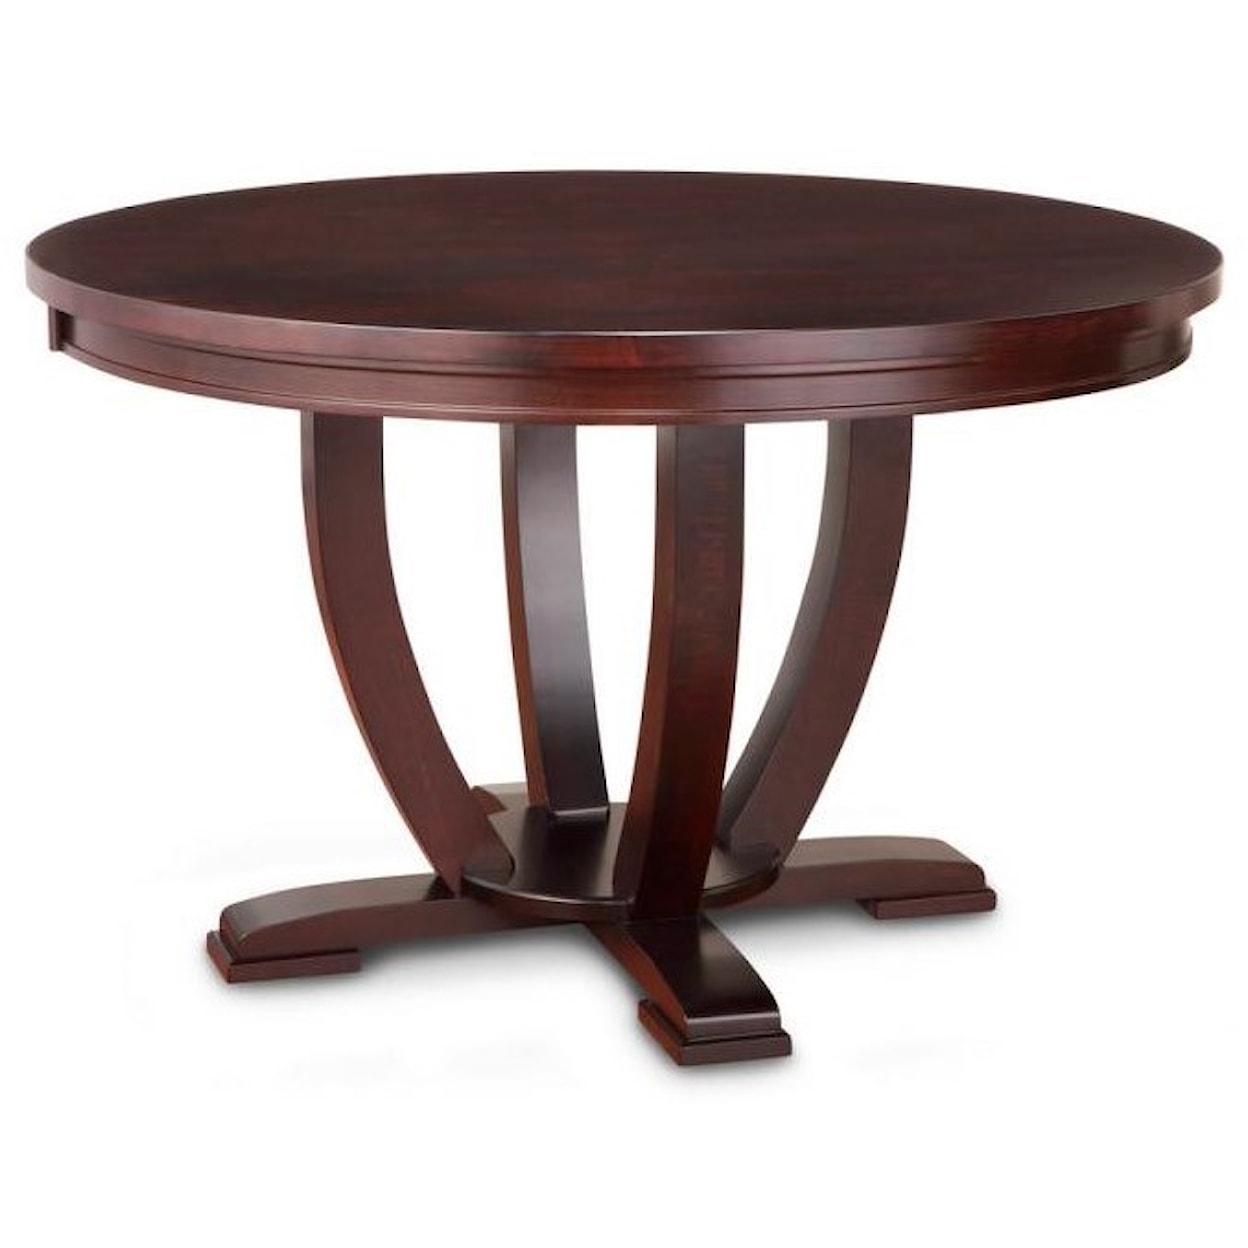 Handstone Florence 42" Round Dining Table